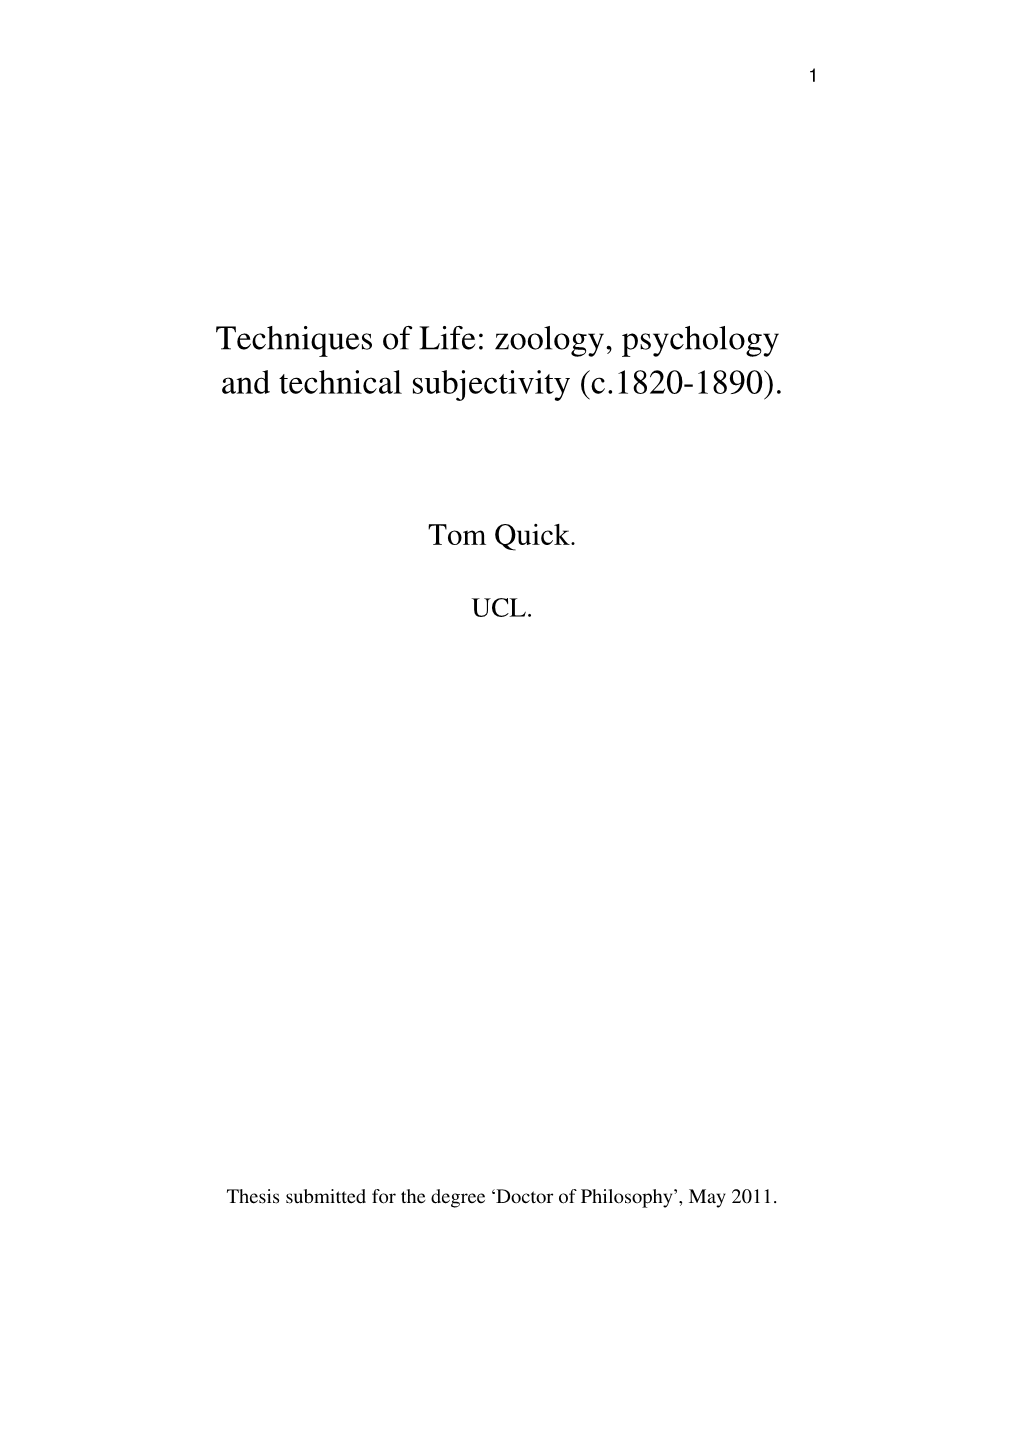 Techniques of Life: Zoology, Psychology and Technical Subjectivity (C.1820-1890)